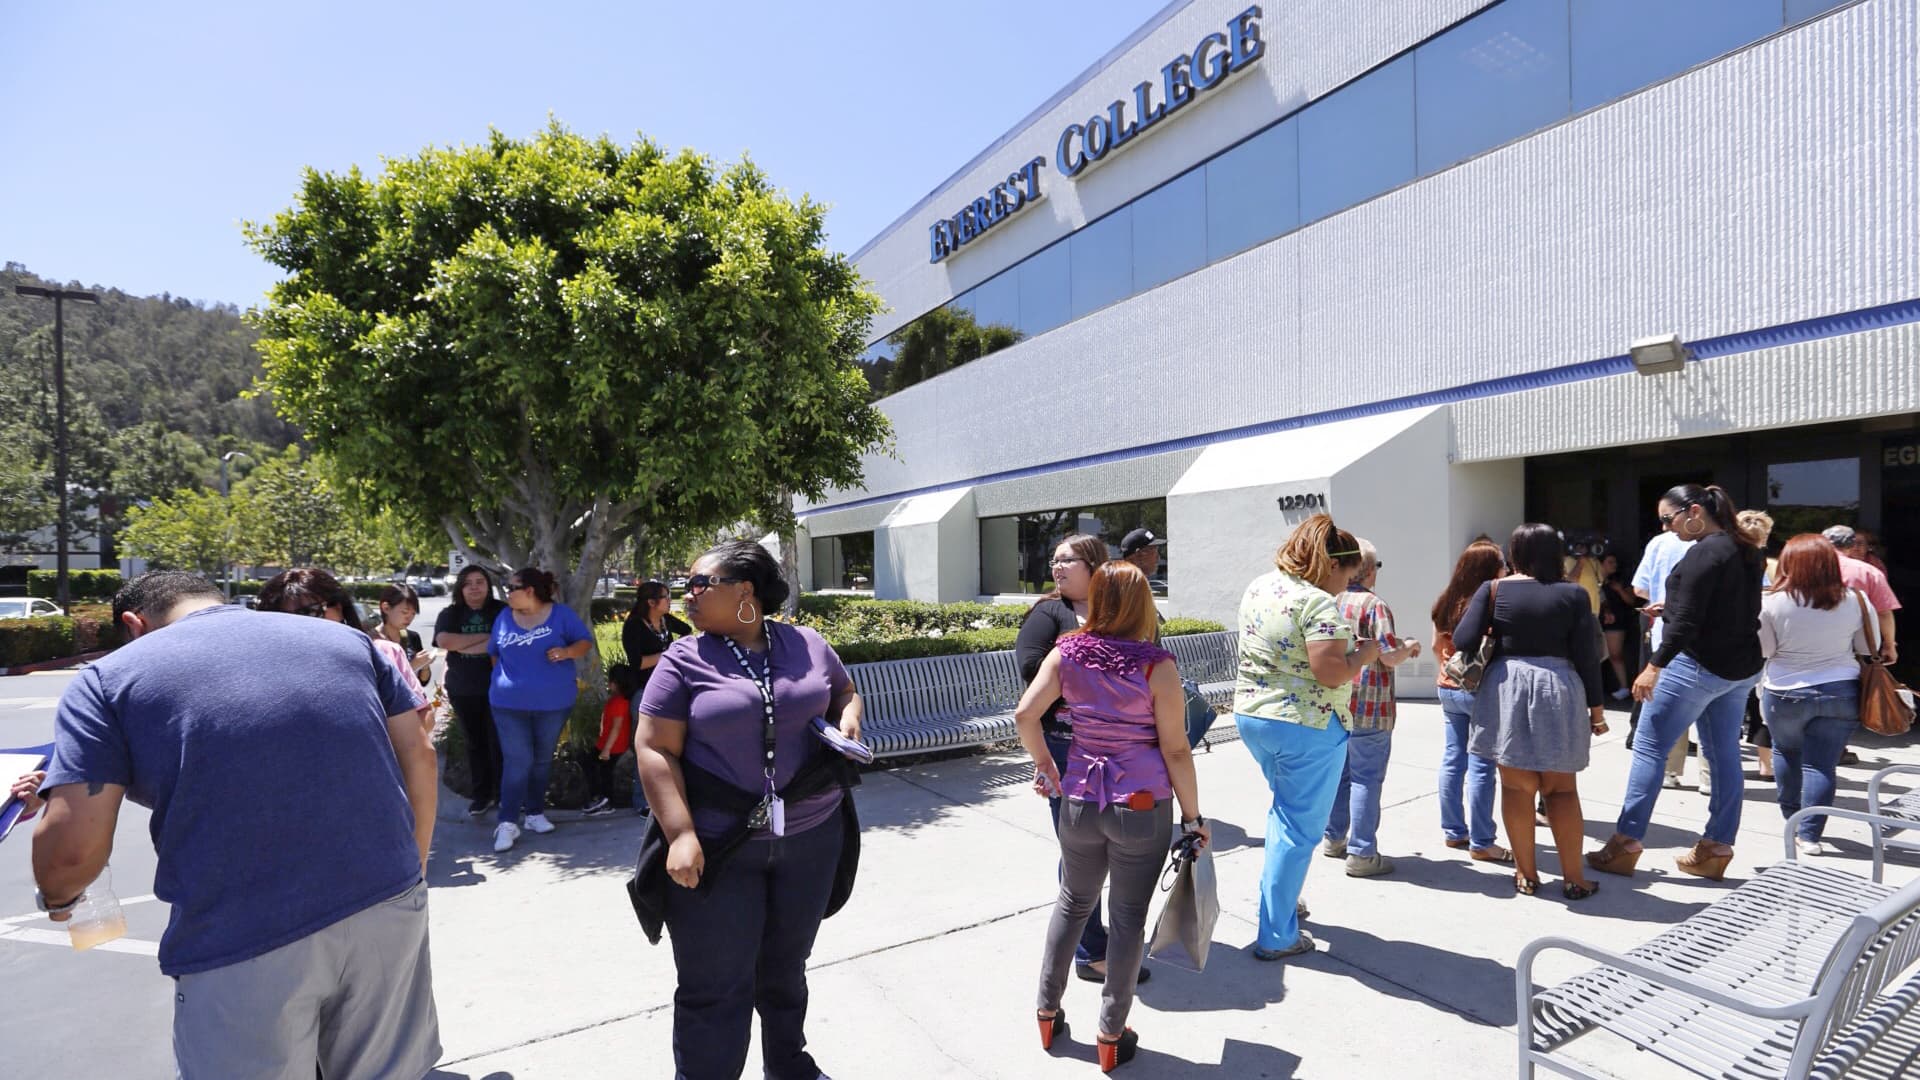 Biden administration will cancel student debt for half a million students from Corinthian Colleges